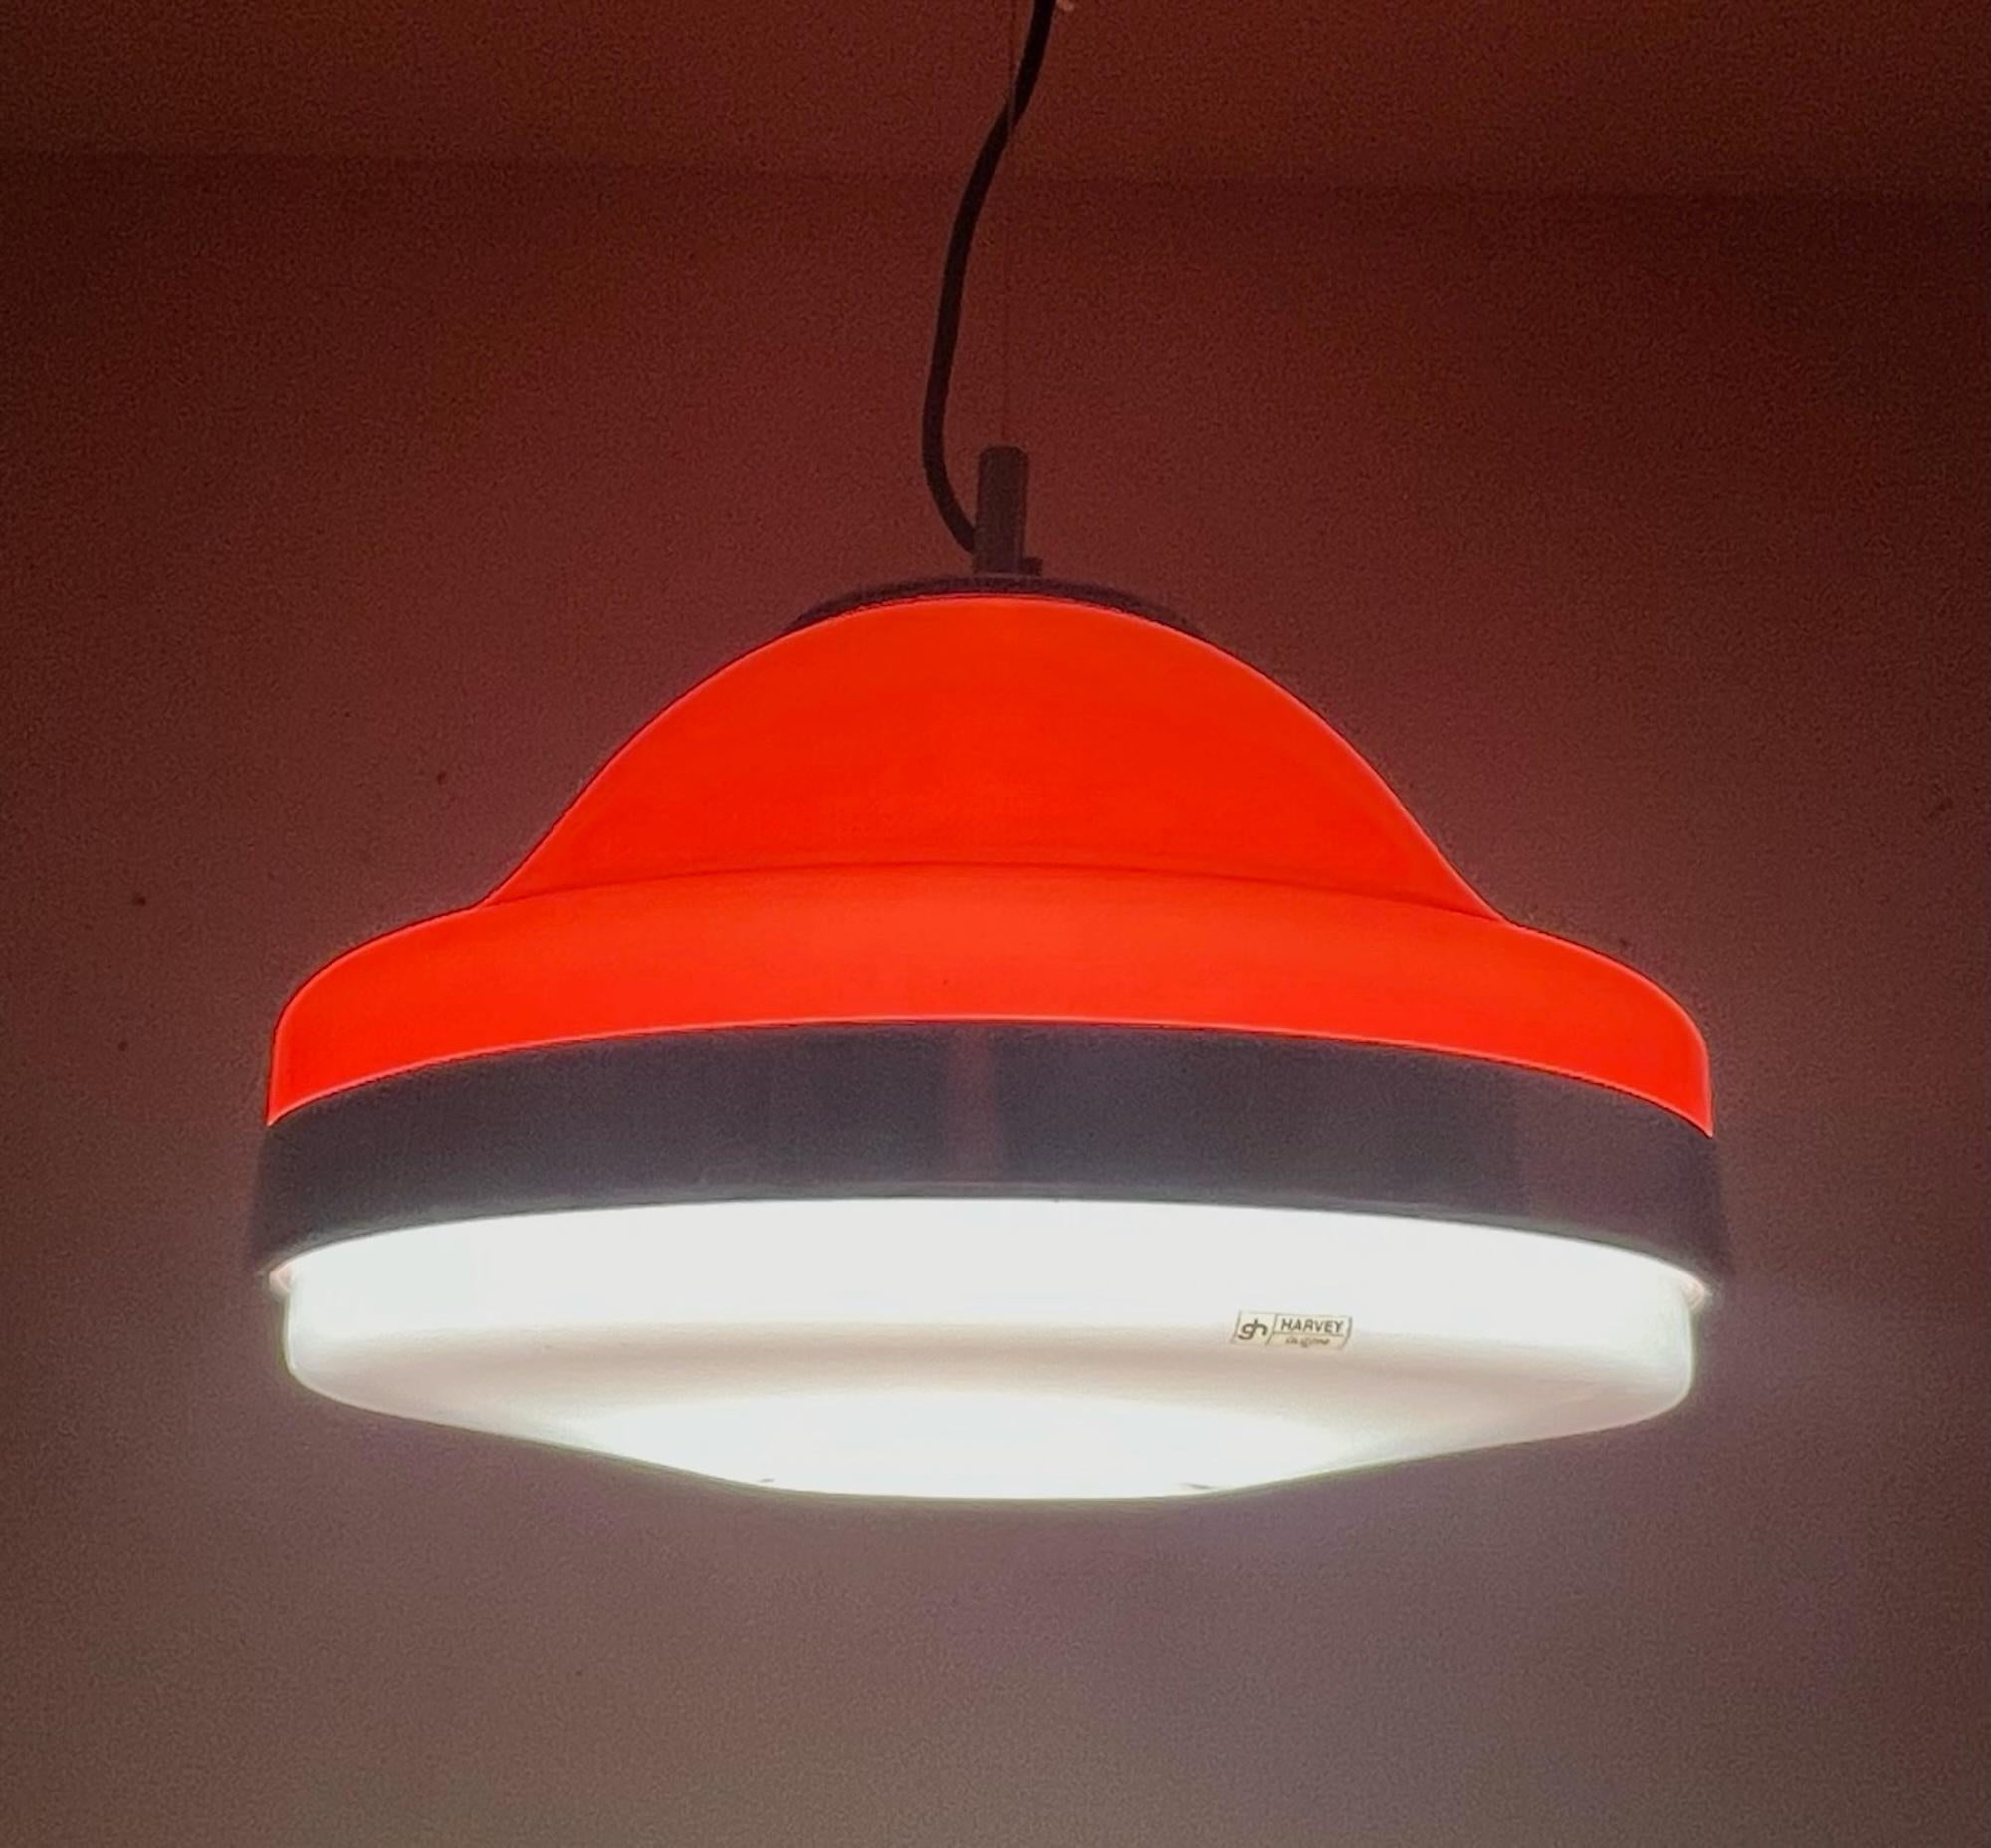 Beautiful and rare space age hanging lamp designed and manufactured by produced by Harvey Guzzini in the 60s/70s.

This avant-garde pendant light features the iconic orange and white acrylic lampshade - with the shiny chrome ring, lid and bezel